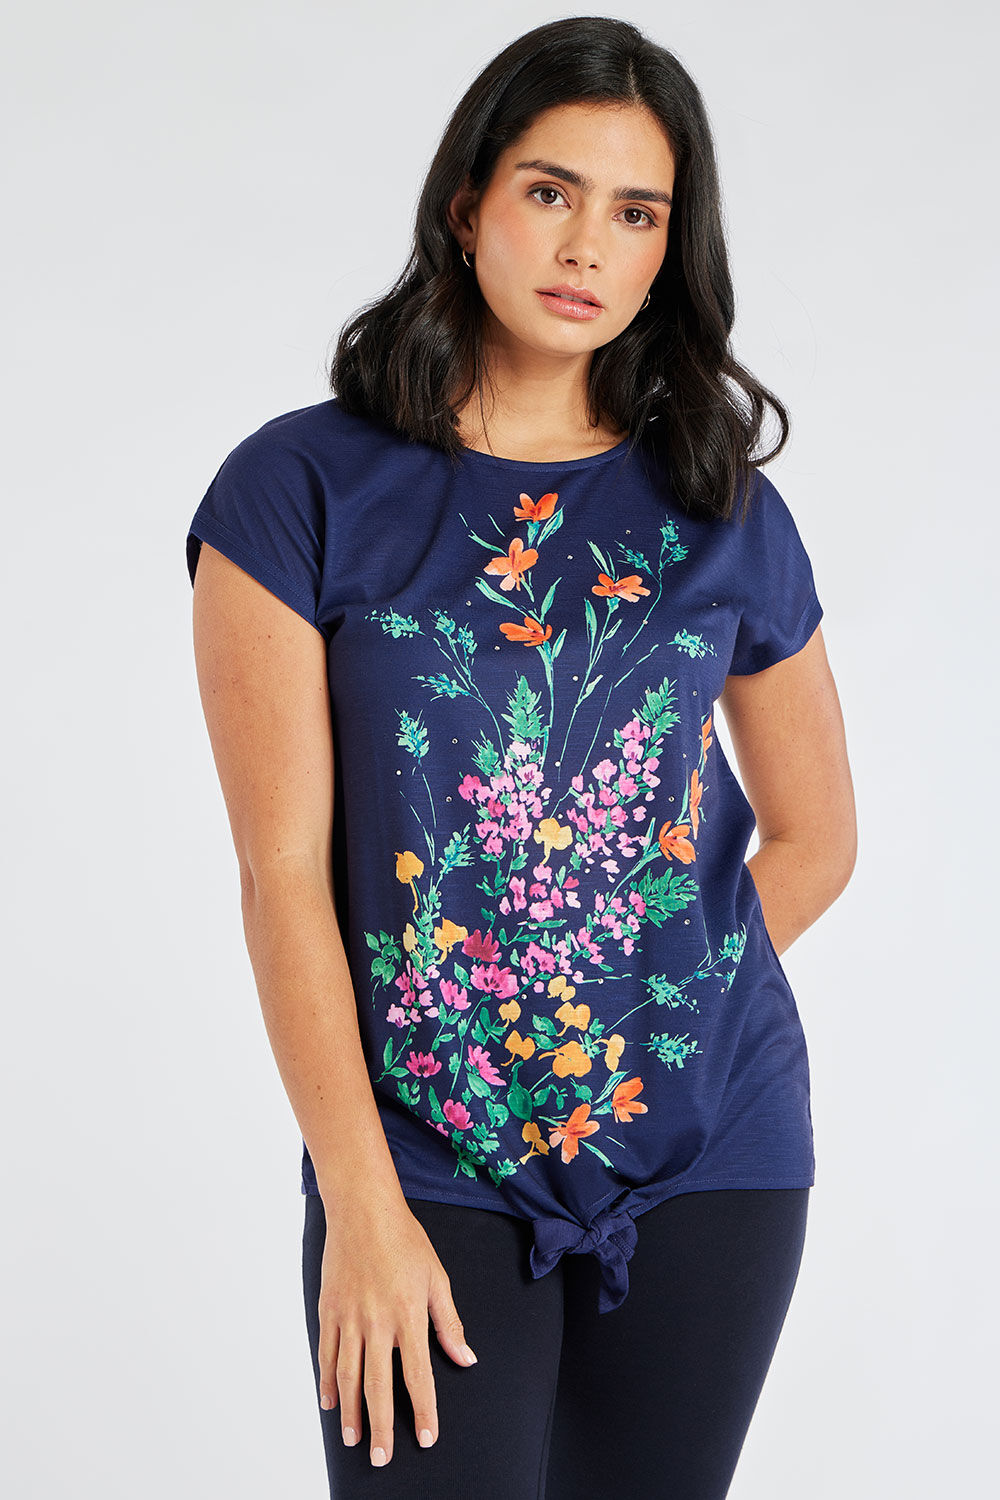 Bonmarche Navy Short Sleeve Sprig Floral Print T-Shirt With Tie Front, Size: 16